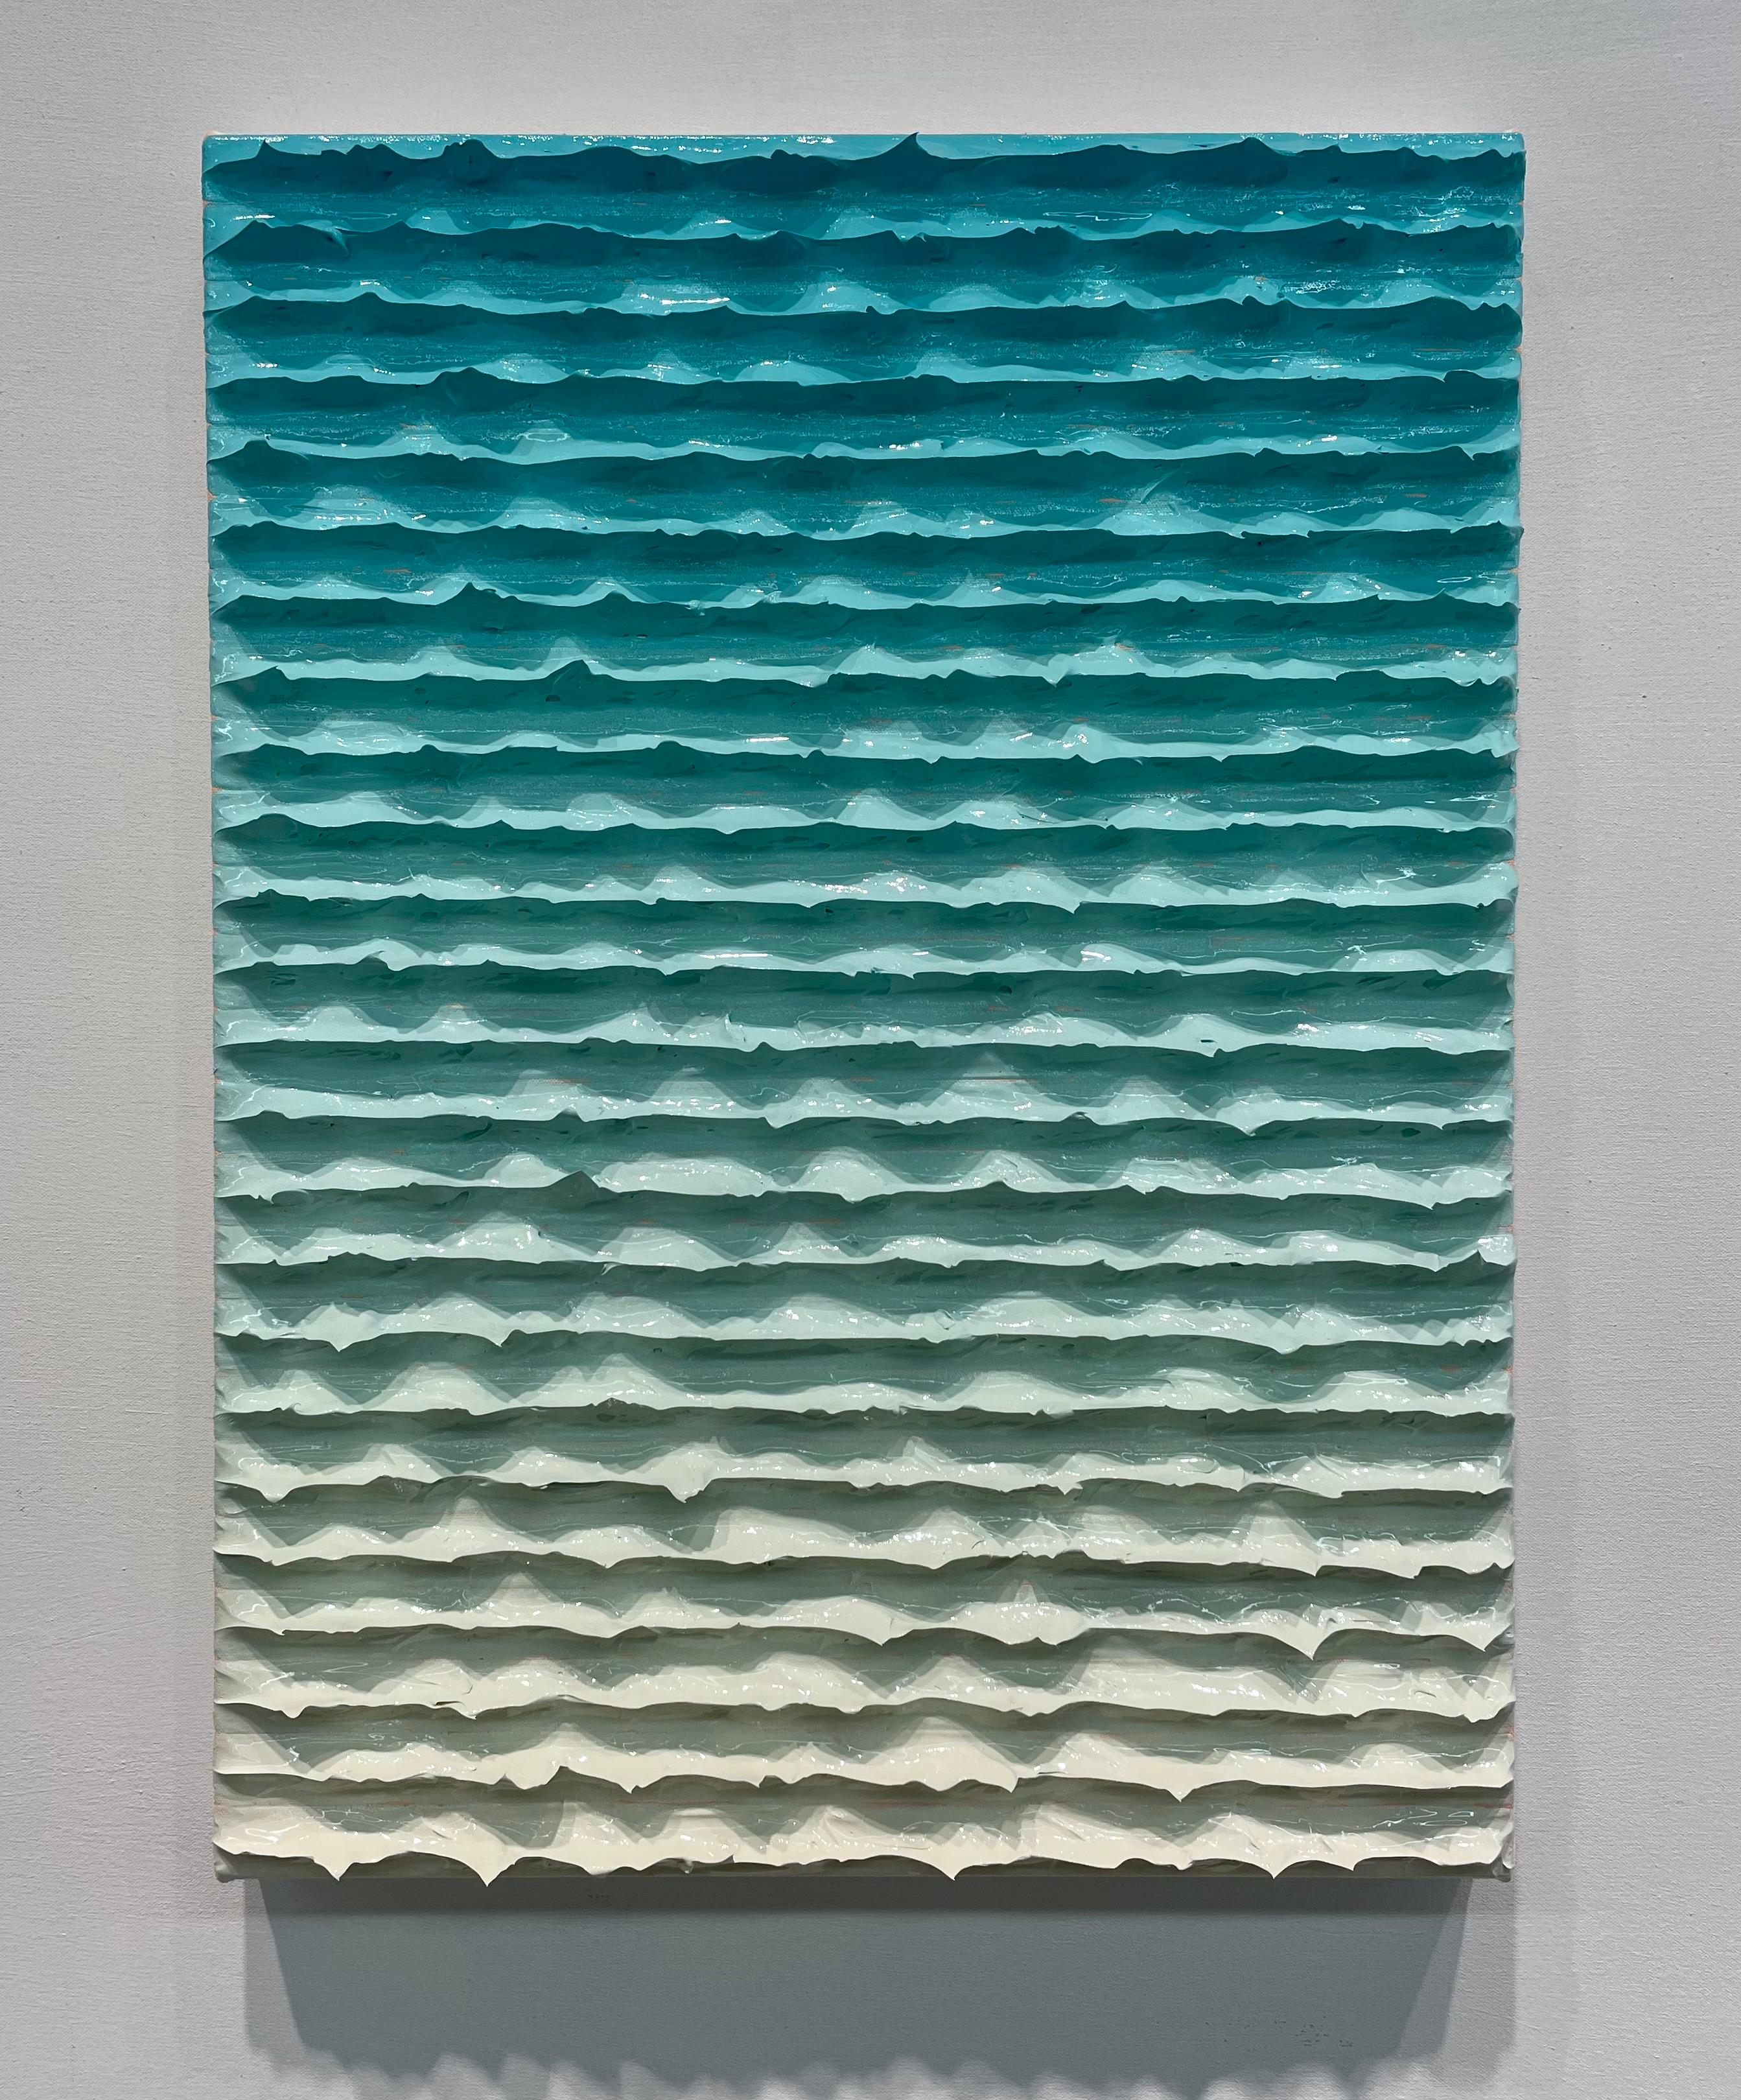 Light blue to teal to a creamy white gradient abstract painting. Daniel Klewer makes his medium stand out against gravity to create wonderful movement and illusions in his art. The motion that is brought to this piece looks as though a wave of water